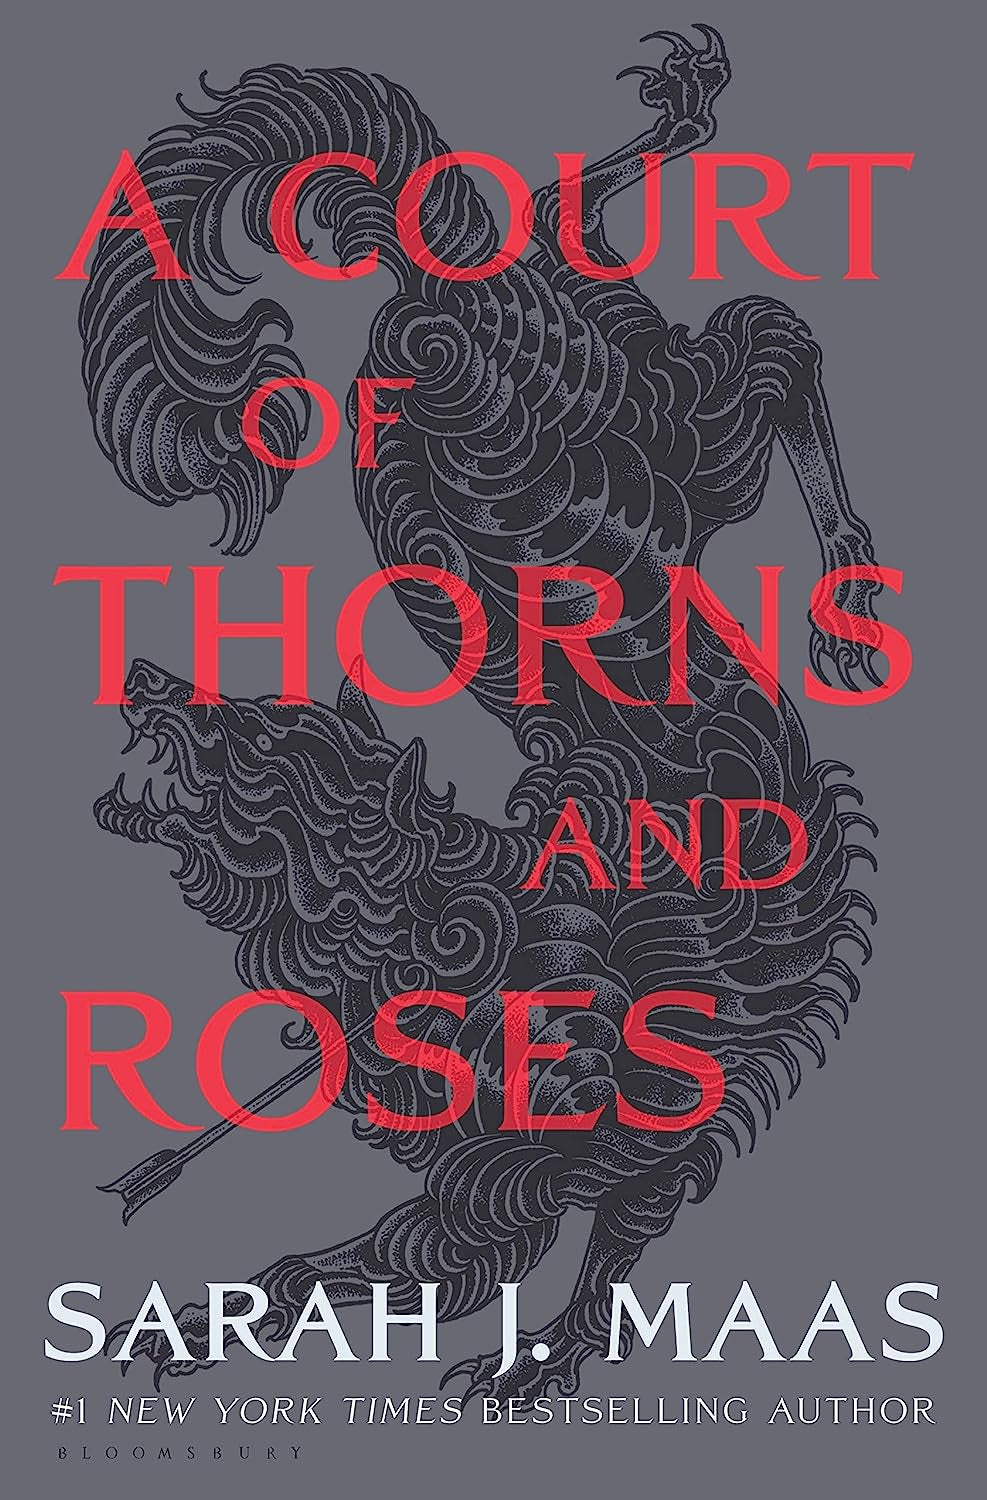 A Court of Thorns and Roses - Sarah J. Maas - Hardcover